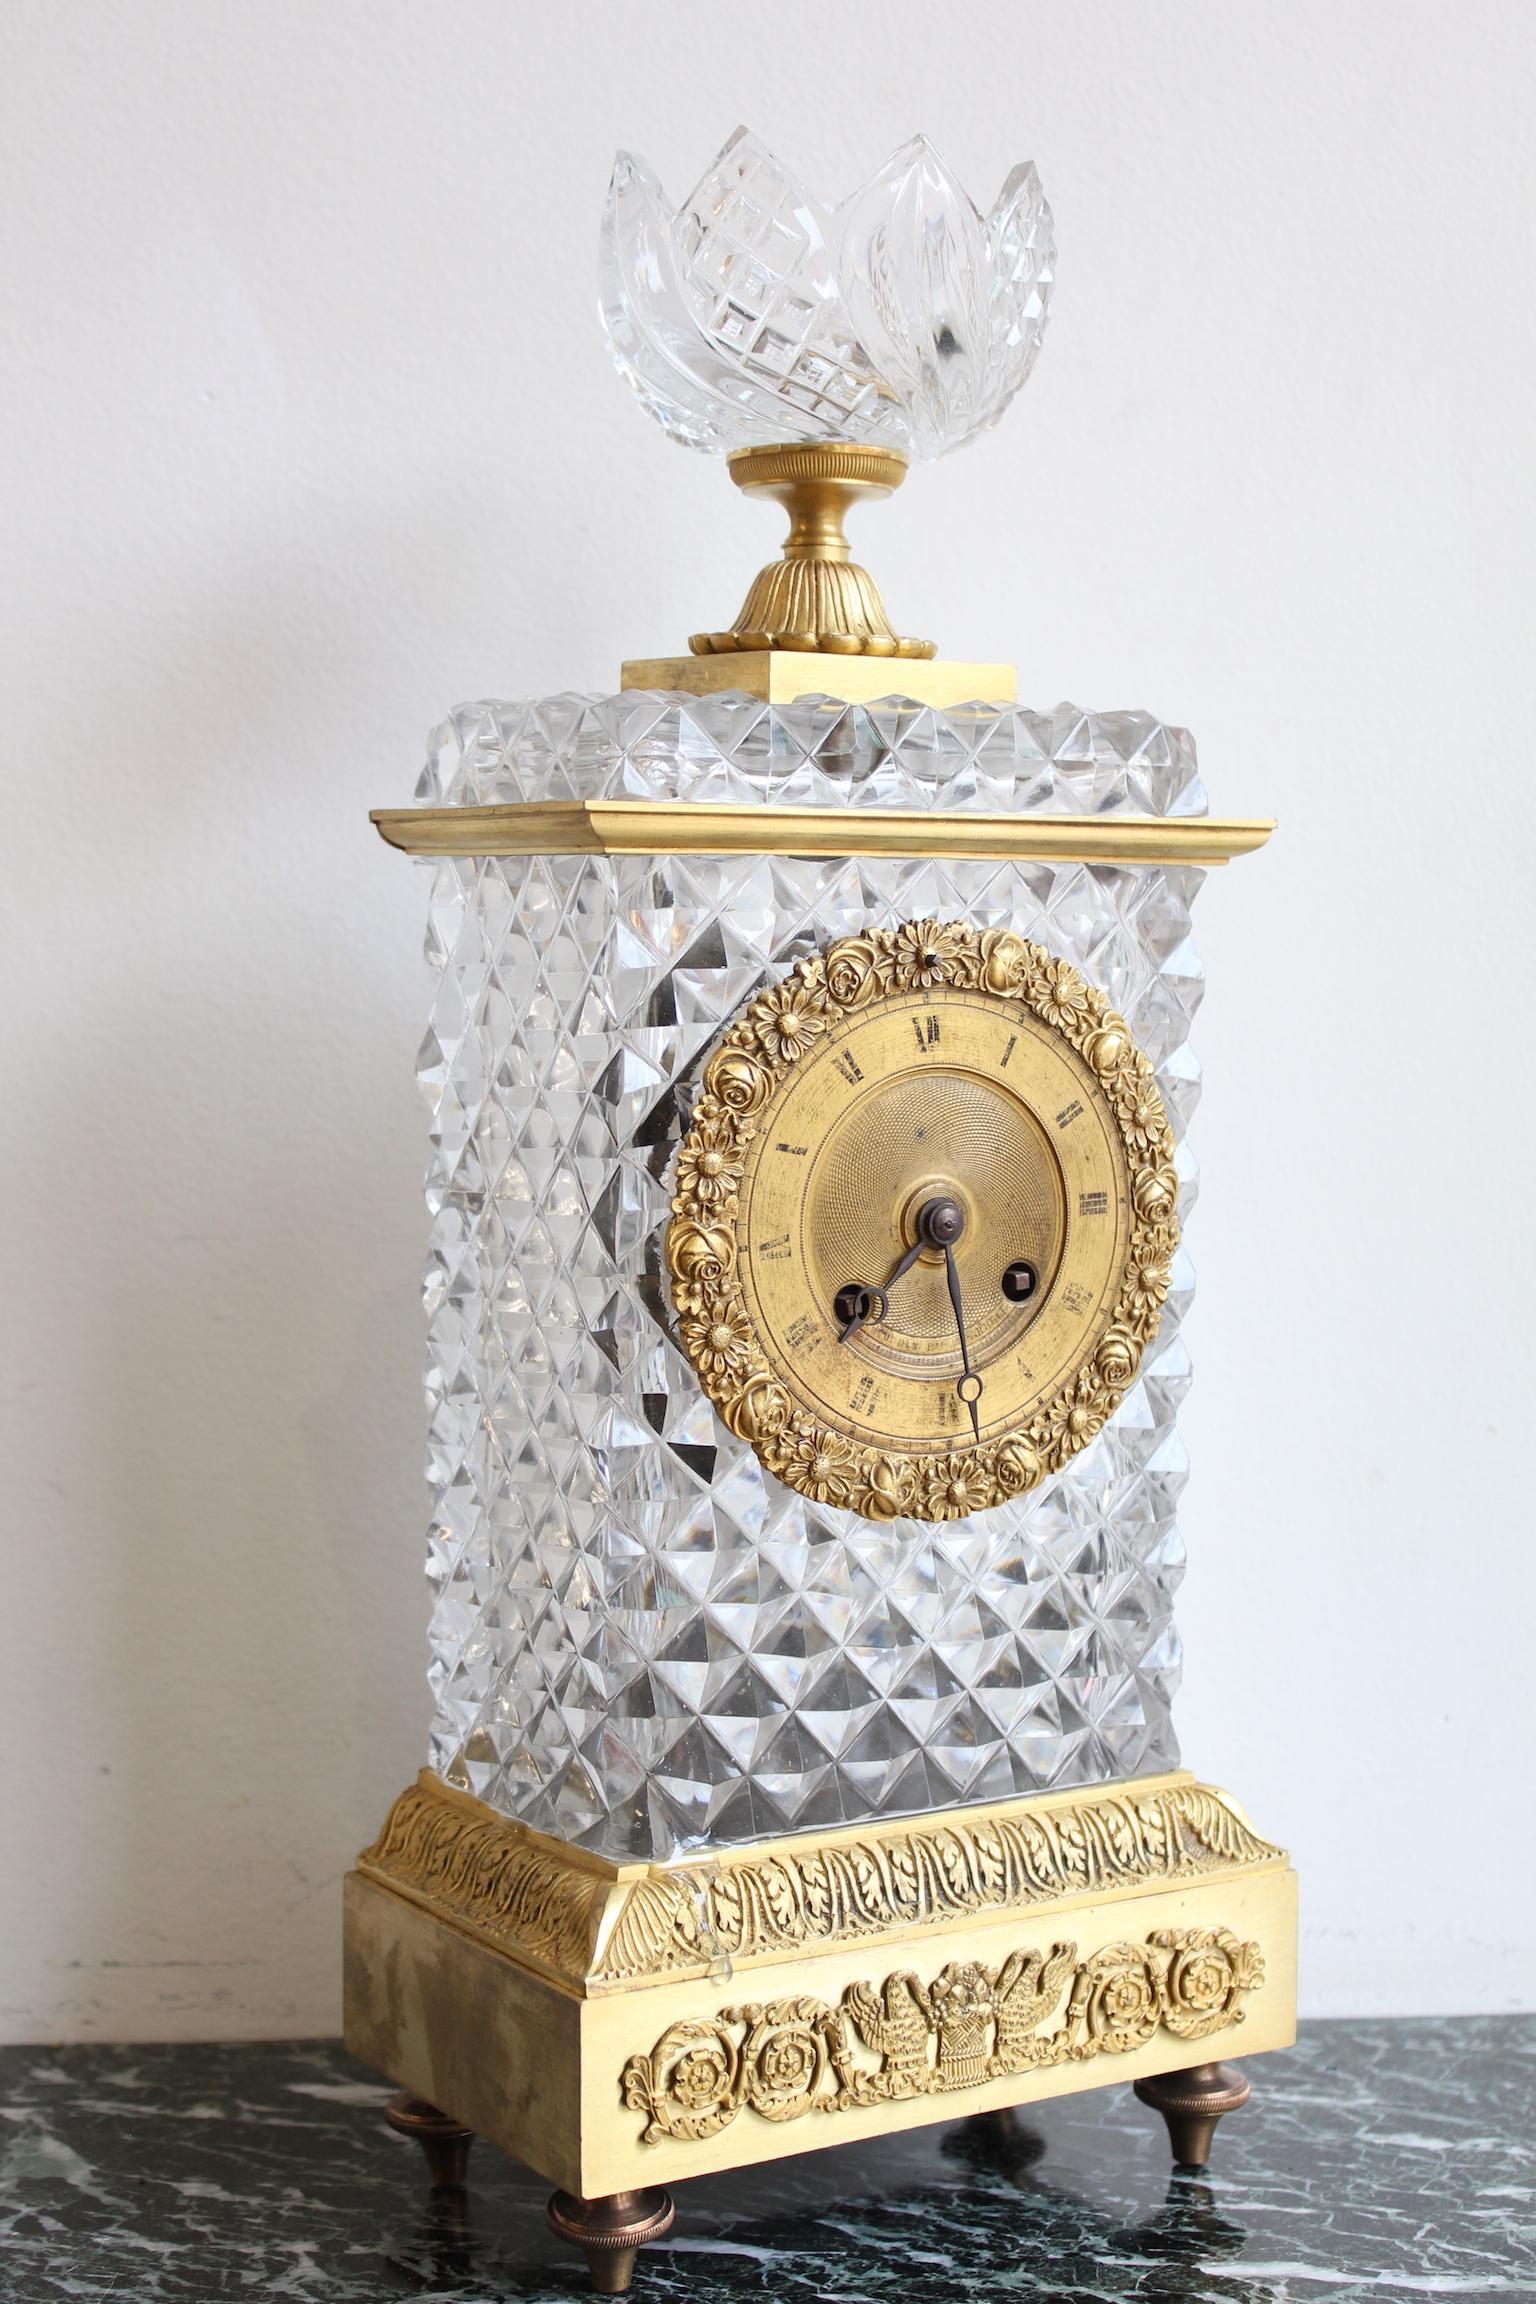 19th century Baccarat crystal and bronze clock.
On the dial: Oudin student of Breguet
Dimensions: Width 16cm, height 39cm, depth 9.5cm
Good condition.